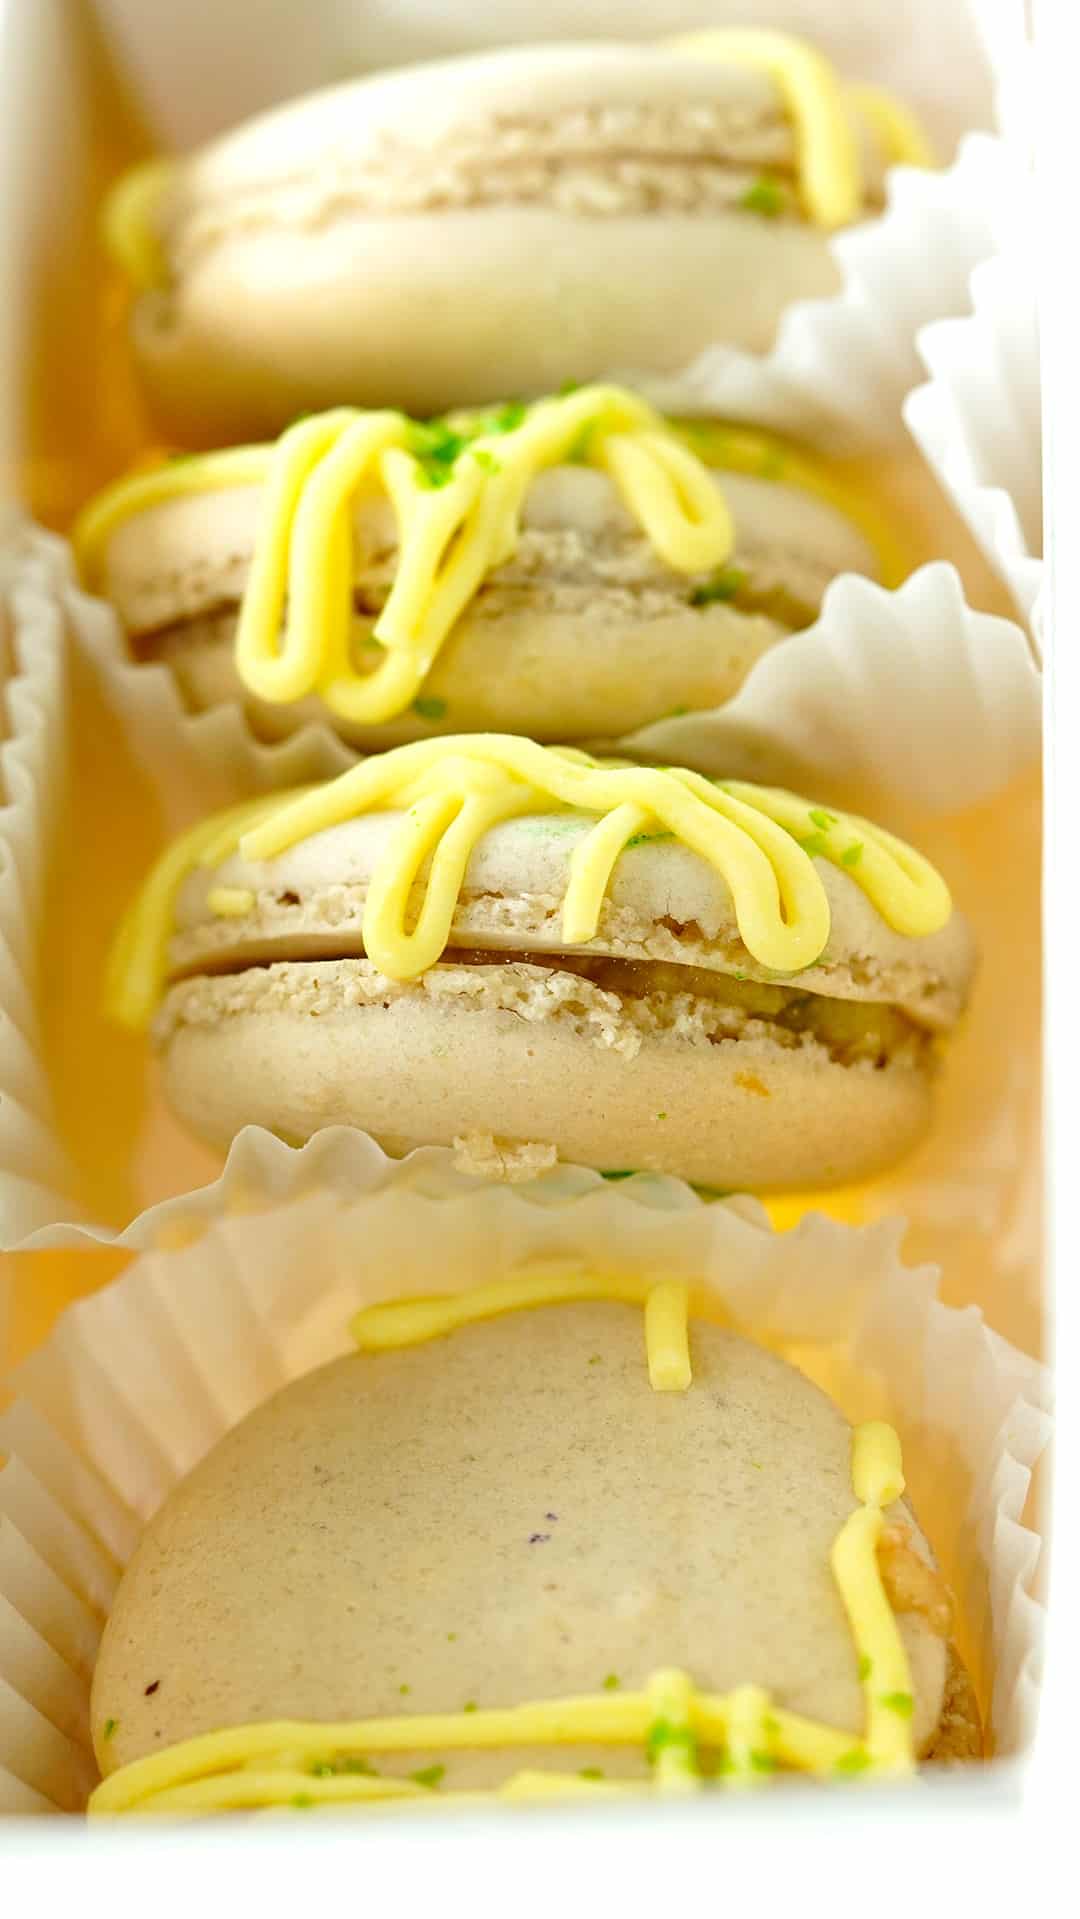 Sun Baked Macarons Cannabis-infused